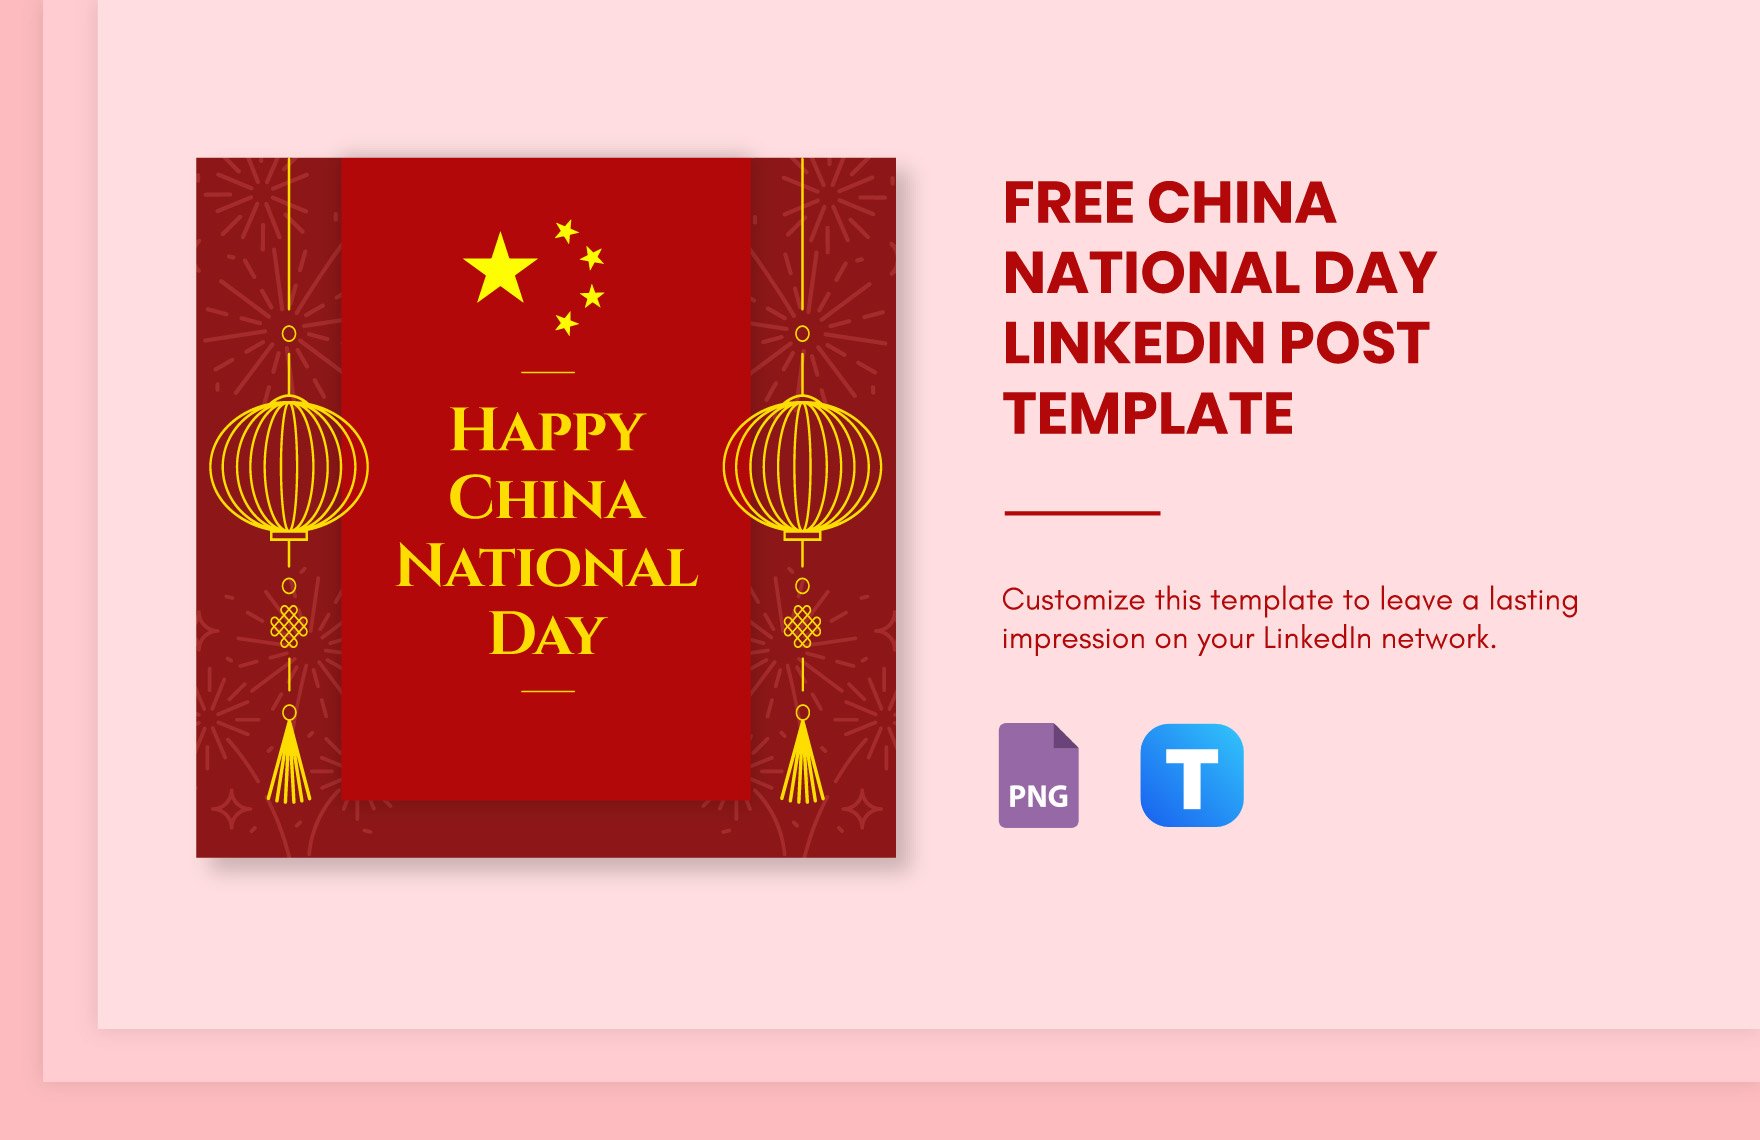 Free China National Day LinkedIn Post Template in PNG